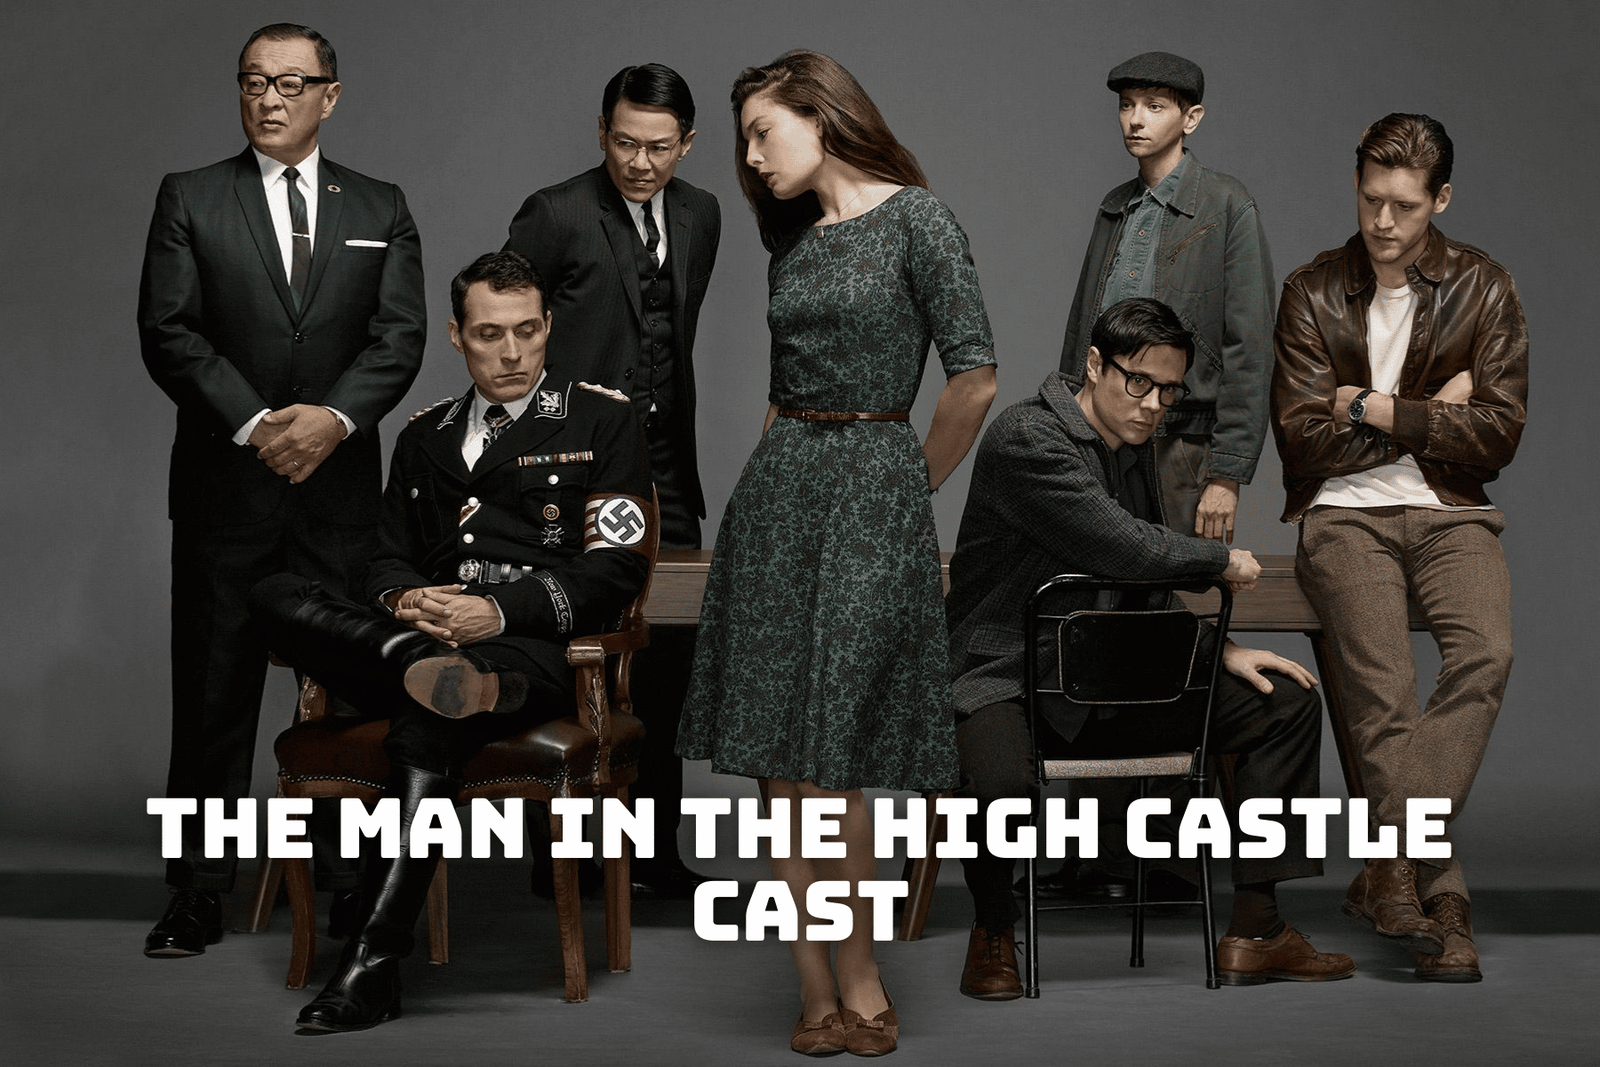 The Man in the High Castle Cast - Ages, Partners, Characters